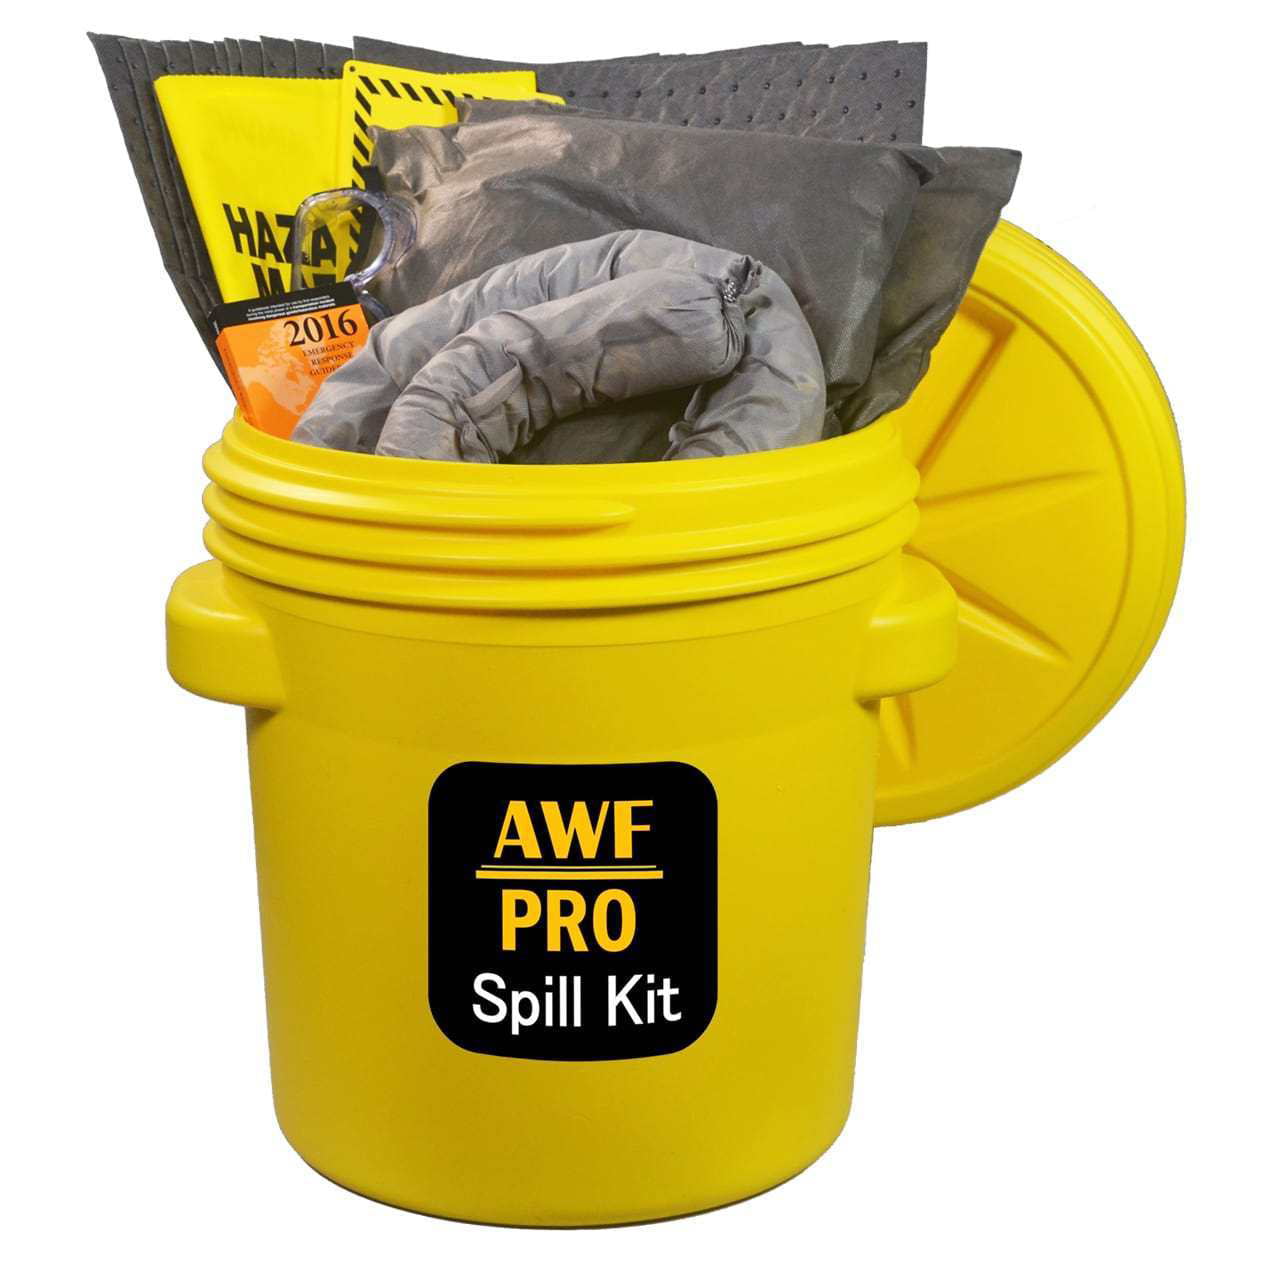 Hazmat Bags 2 Pillows 18x18 Wall Sign Chemical Gloves 3 Socks 3x12 50 PC: Overpack Drum Guide Book Goggles Pro Grade 35 Heavy Duty Pads 15x19 20 Gallon Hazmat Spill Kit 